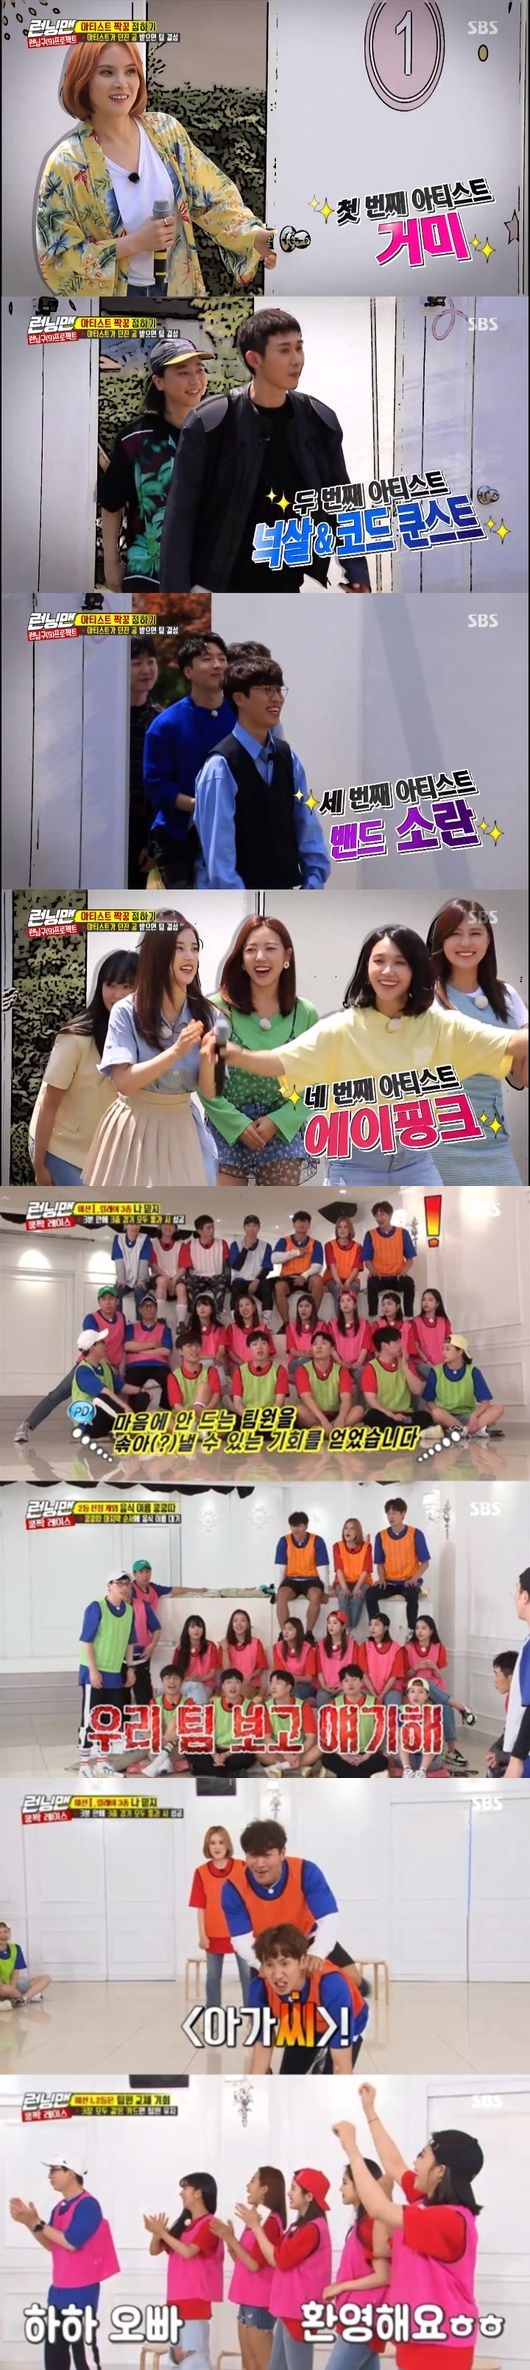 Running Man kept its No. 1 spot in the same time zone of 2049 Target Viewpoint.According to Nielsen Korea, a ratings agency on the 8th, SBS Running Man, which was broadcast on the 7th, soared to 8.7% of the highest audience rating per minute, and the 2049 target audience rating, an important indicator of major advertising officials, recorded 4% (based on the second part of the audience rating of households in the metropolitan area).The broadcast was made up of the Running Zone Project, and the top four artists who will hold a 9th anniversary Korean fan meeting with the members were unveiled.The Artist 1 team and two members had to be paired, and the OST Queen spider first appeared, paired with Kim Jong-kook and Lee Kwang-soo.Nunsal & Cod Kunst was in close contact with Song Ji-hyo X Haha, and the band disturbance was paired with Yoo Jae-Suk X Jeon So-min and girl group Apink with Ji Suk-jin X Yang Se-chan.In particular, Nucksal and Song Ji-hyo made a bigger smile as they became a hot topic with resemblance.With the first pair set, it was decorated with a kung-kak race that takes place in a total of three rounds.The final team was able to stand on stage as a collaboration team, and all teams played a confrontation without concessions.In the first showdown, the spider X Kim Jong-kook X Lee Kwang-soo team took first place and did not change the team member, but the second-ranked Apink X Ji Suk-jin X Yang Se-chan team did not agree.Eventually, Yoo Jae-Suk X Haha was paired with Apink, and the scene was the best one minute with a highest audience rating of 8.7%.